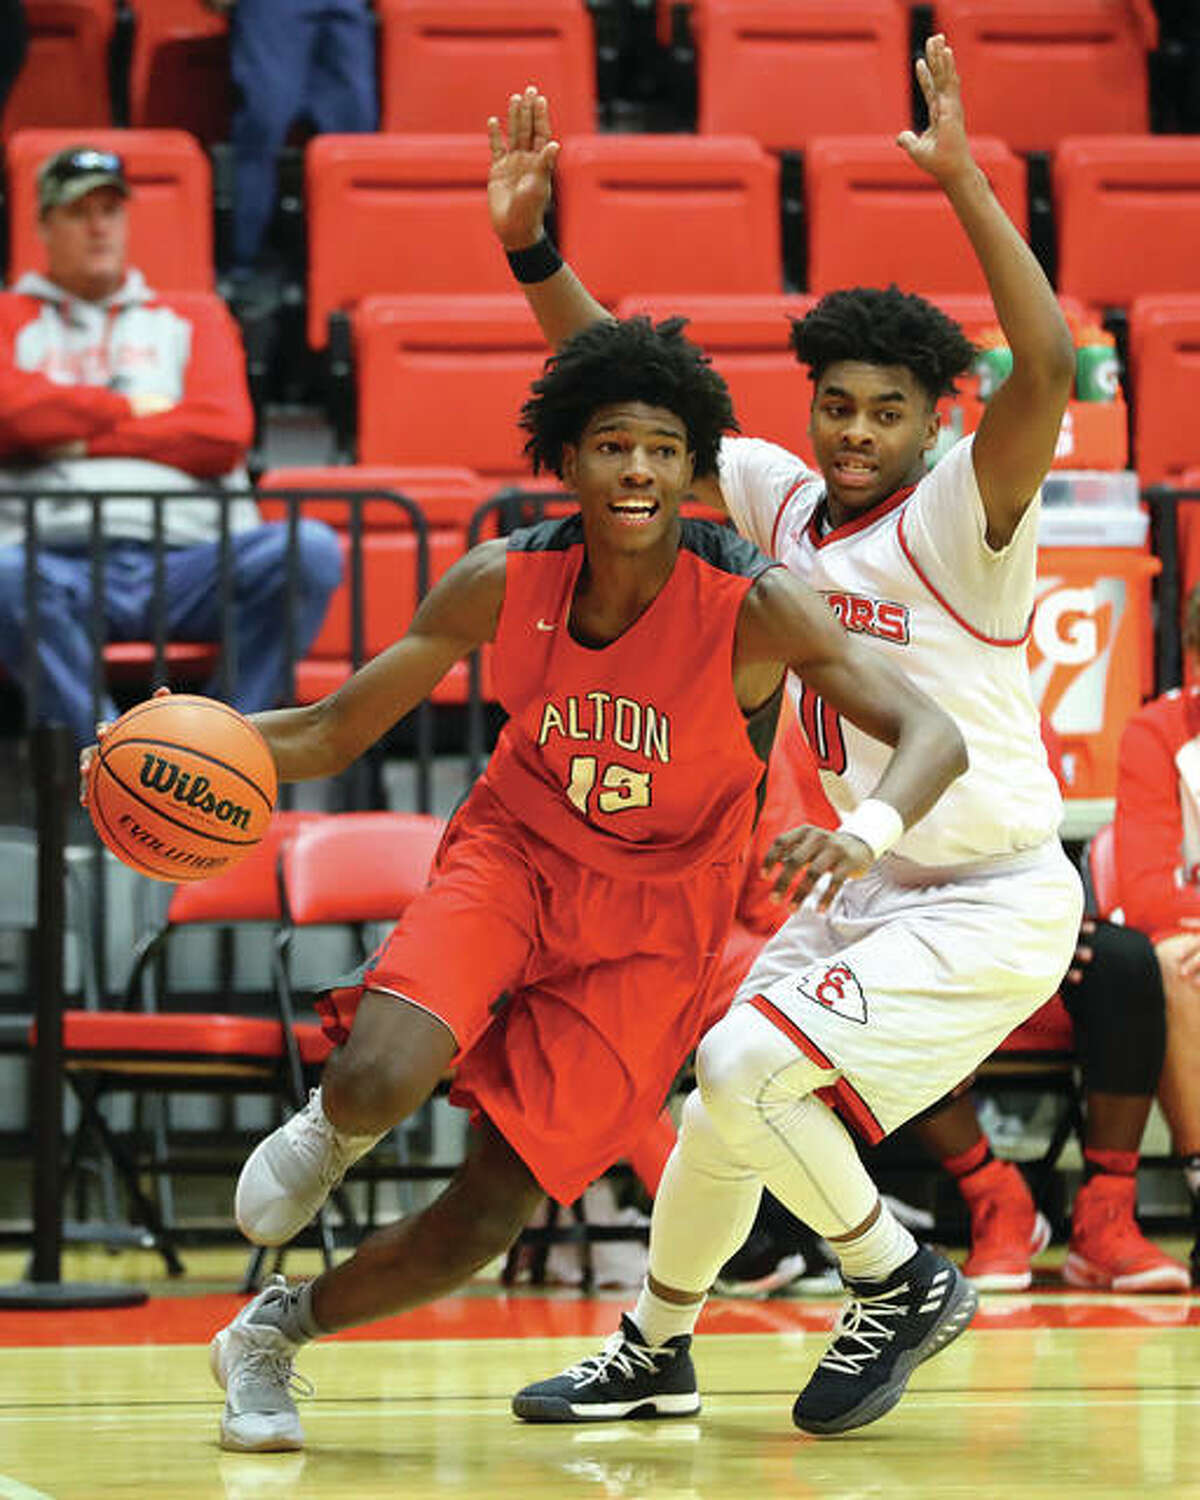 Alton’s Malik Smith (left) drives the baseline after getting past Granite City’s Jerry Watson during Saturday’s game at SIUE’s Vadalabene Center.